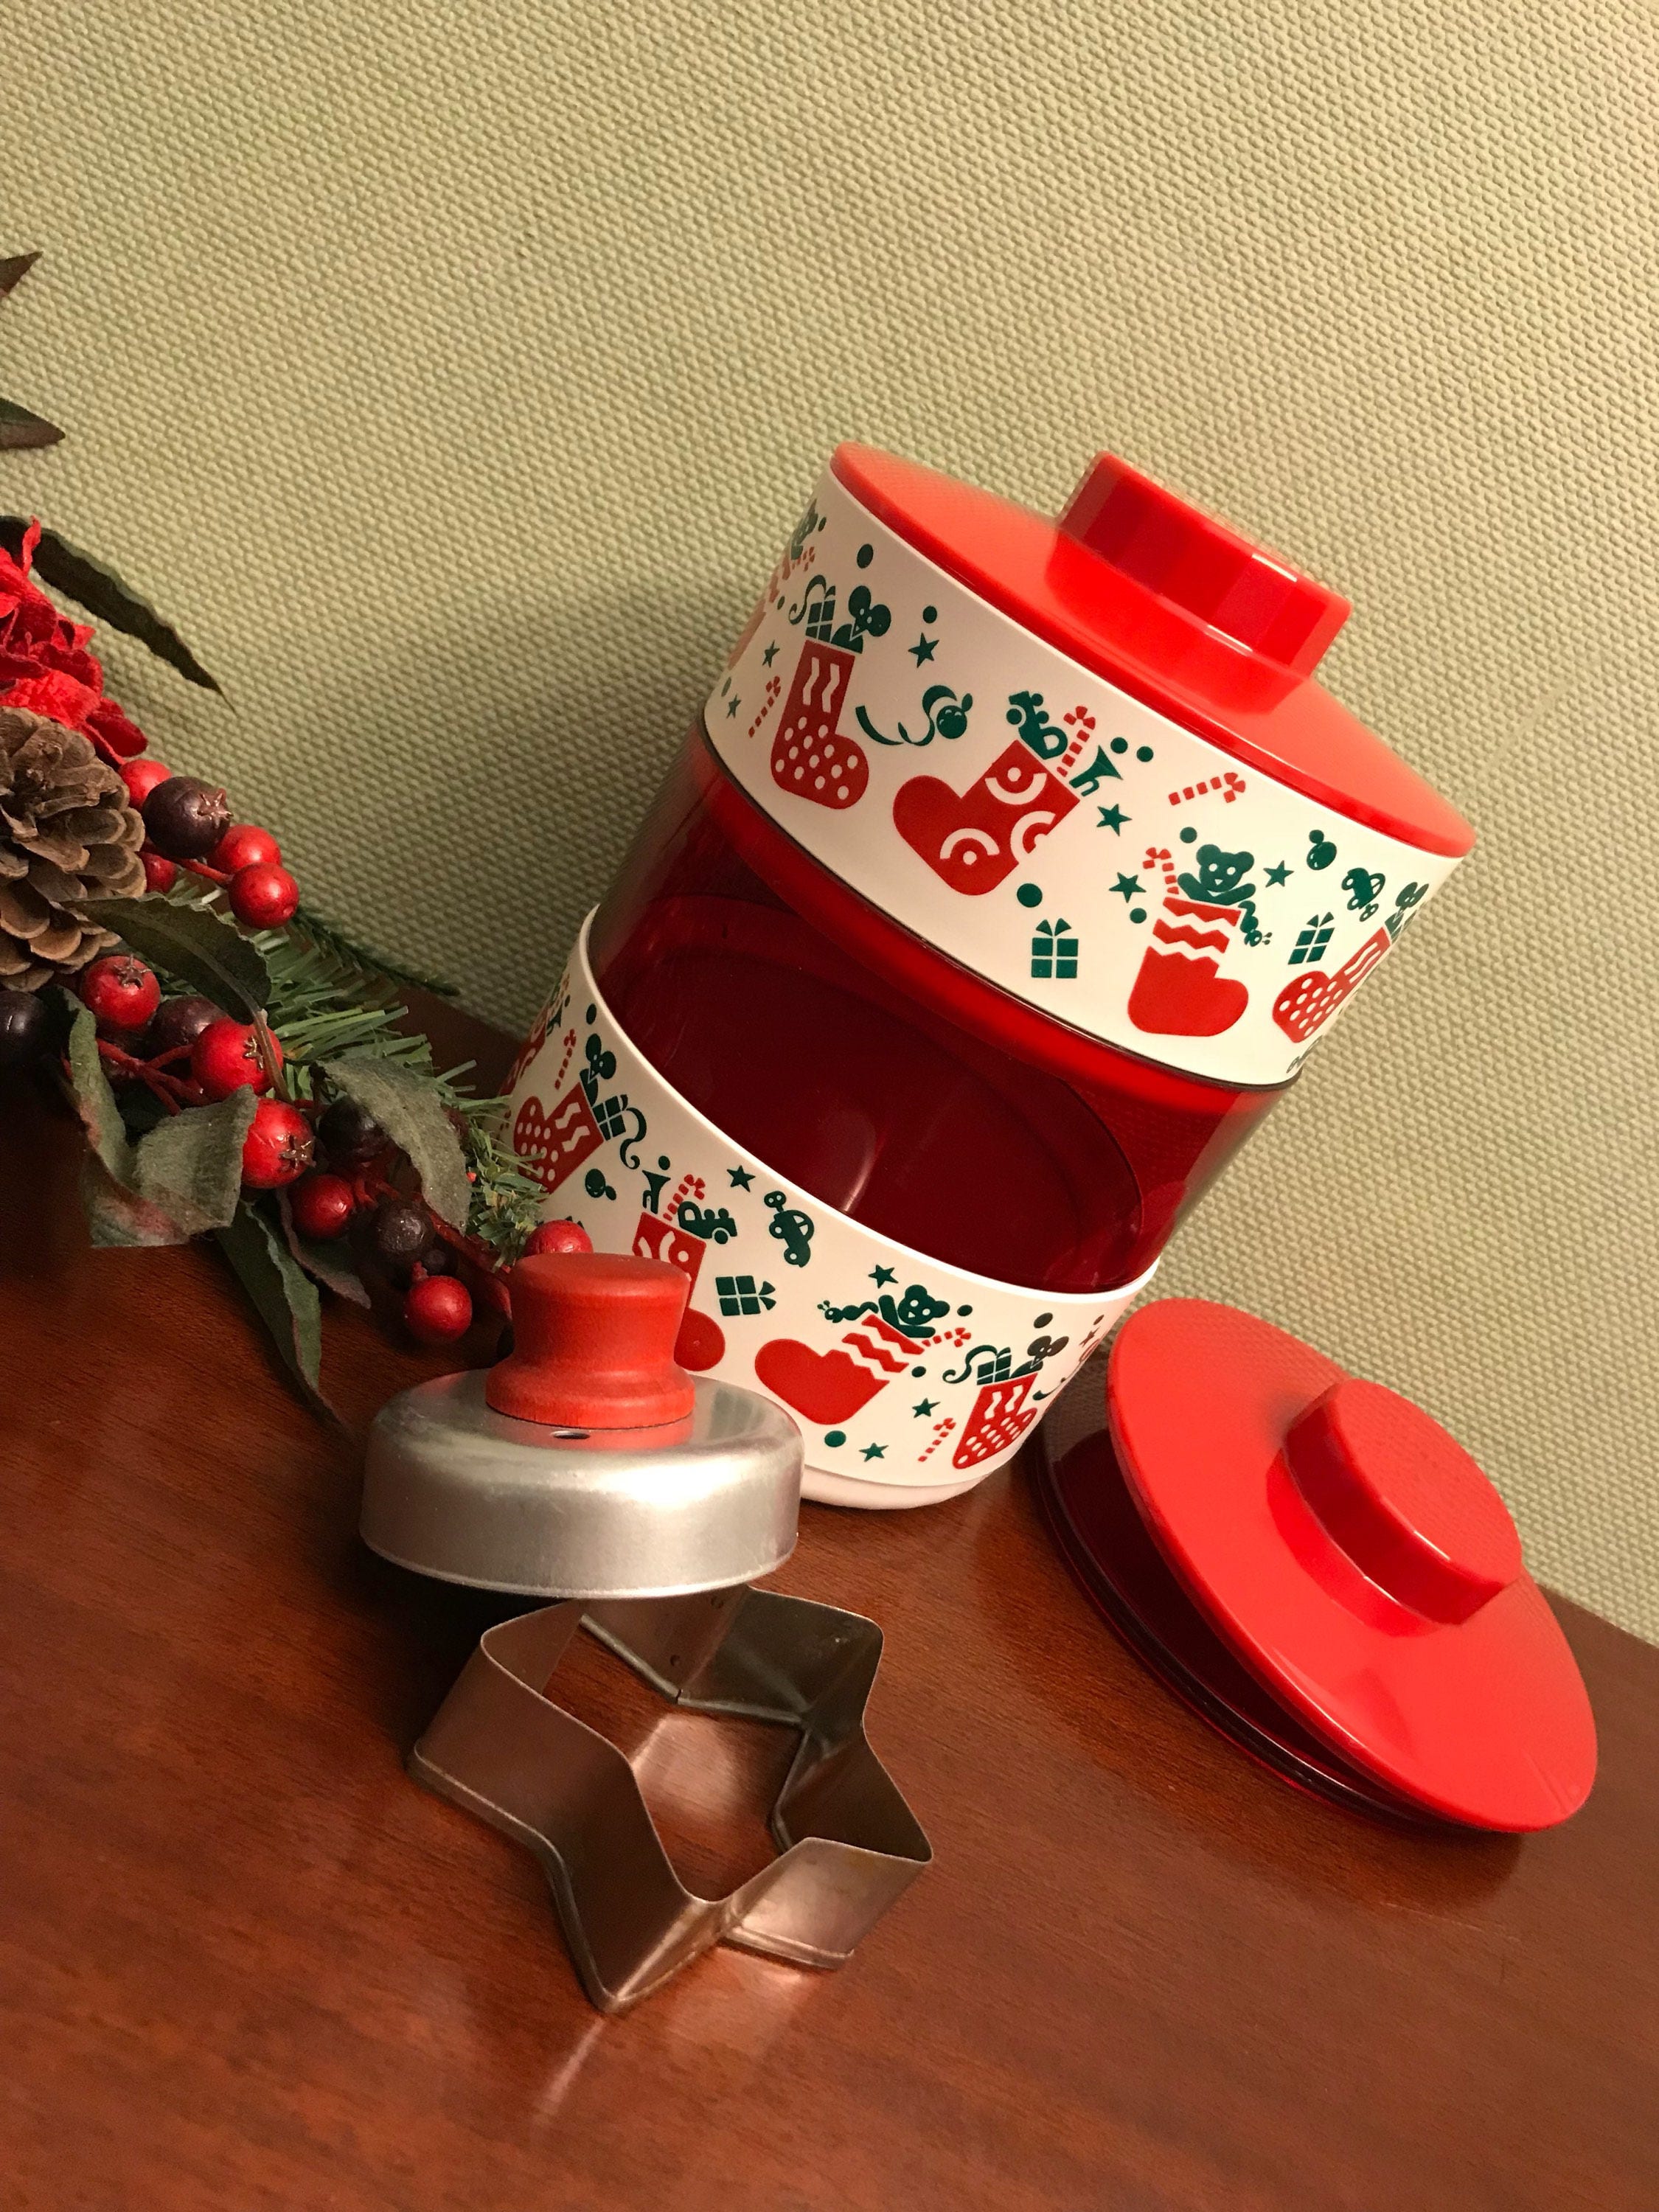 Vintage Tupperware Holiday Canister Set 263-13 & 264-30